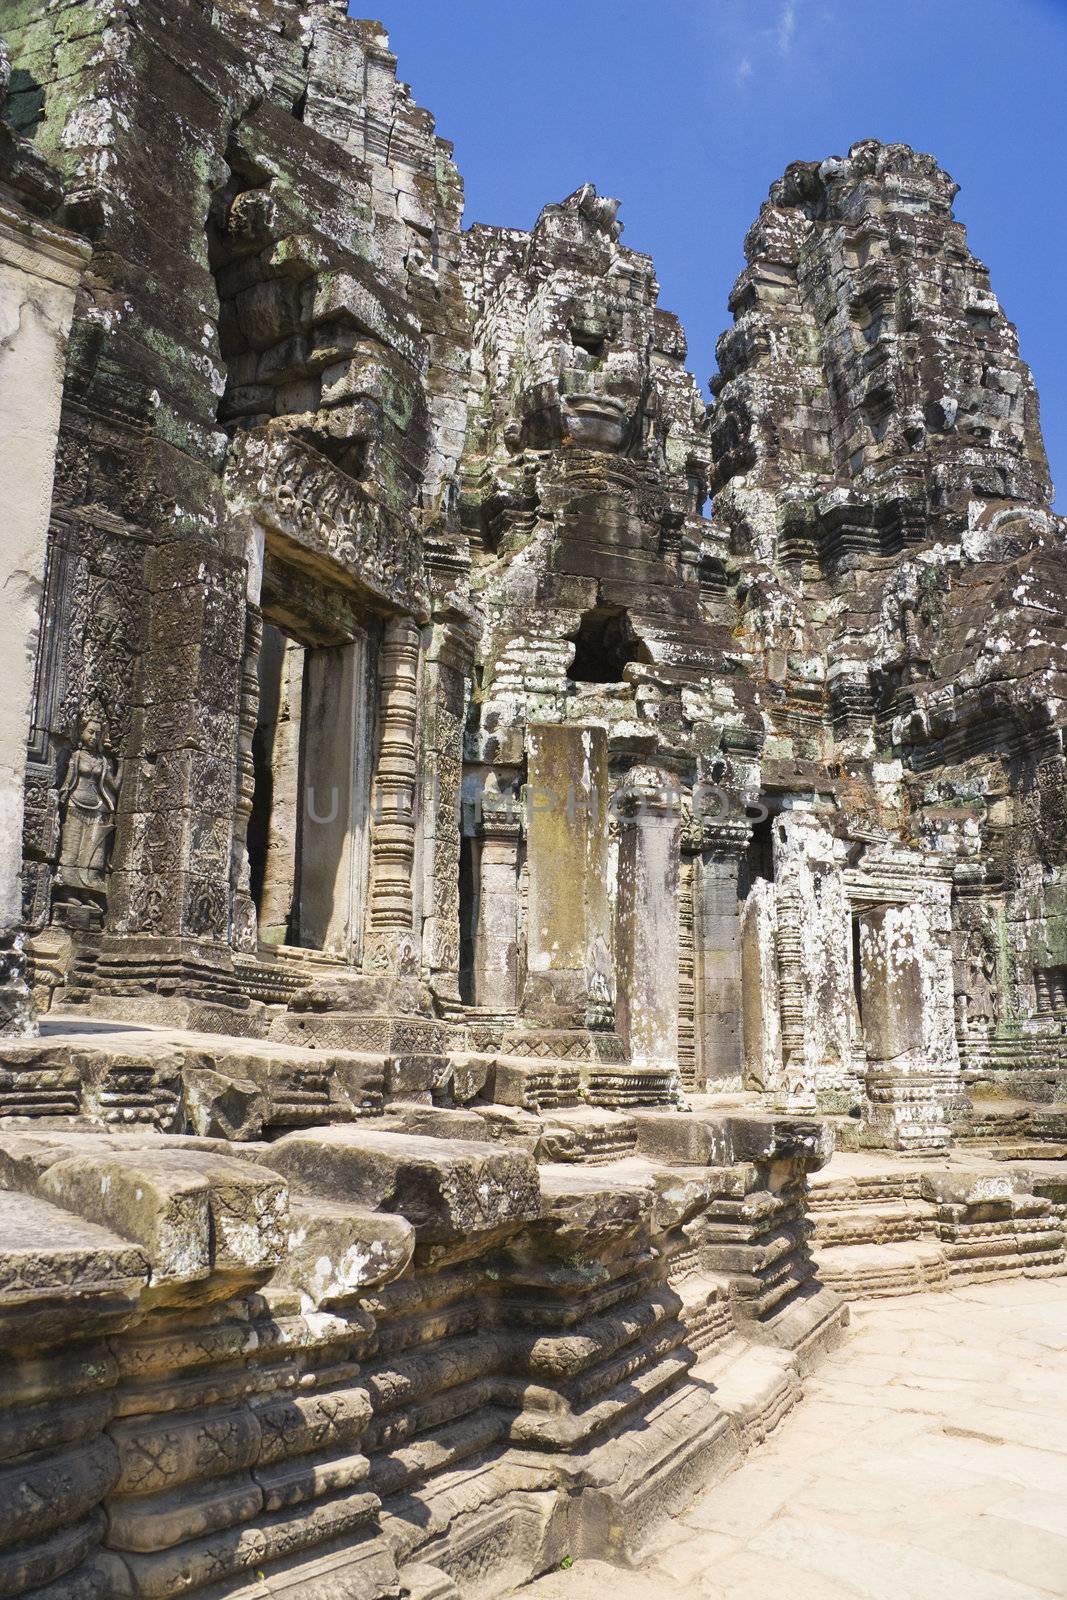 Image of UNESCO's World Heritage Site of Bayon, which is part of the larger temple complex of Angkor Thom, located at Siem Reap, Cambodia. This is one of the temples in Siem Reap where the Hollywood movie Lara Croft Tomb Raider was filmed at.